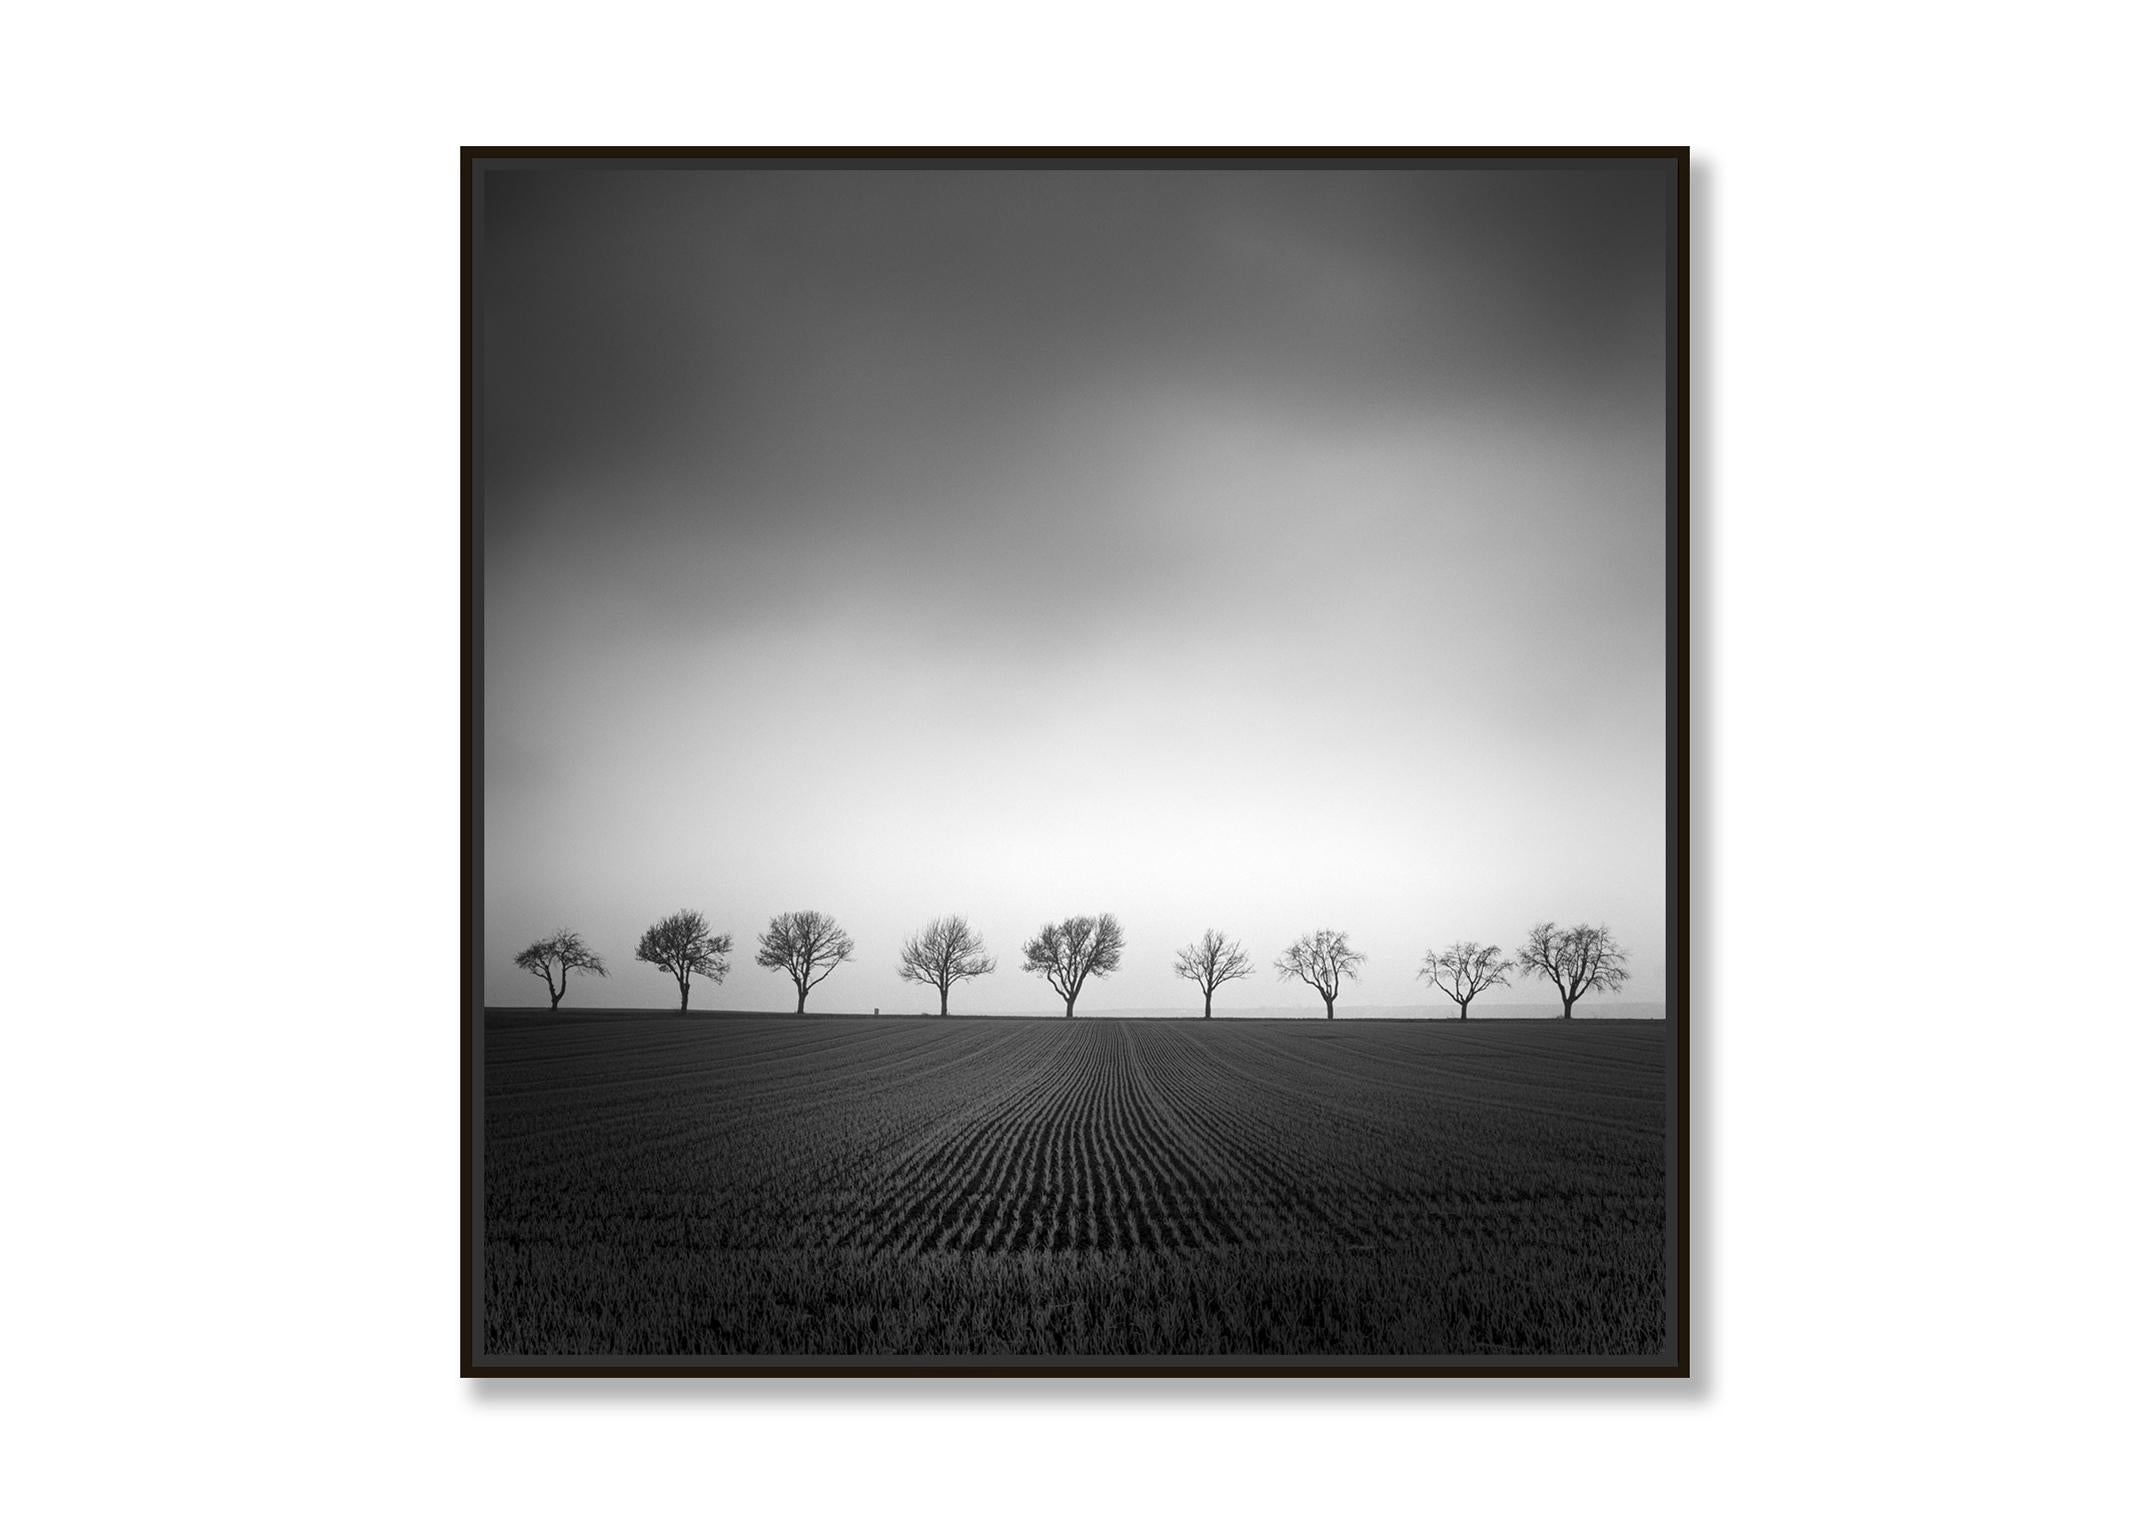 Nine Cherry Trees, Austria, contemporary black and white photography, landscape - Photograph by Gerald Berghammer